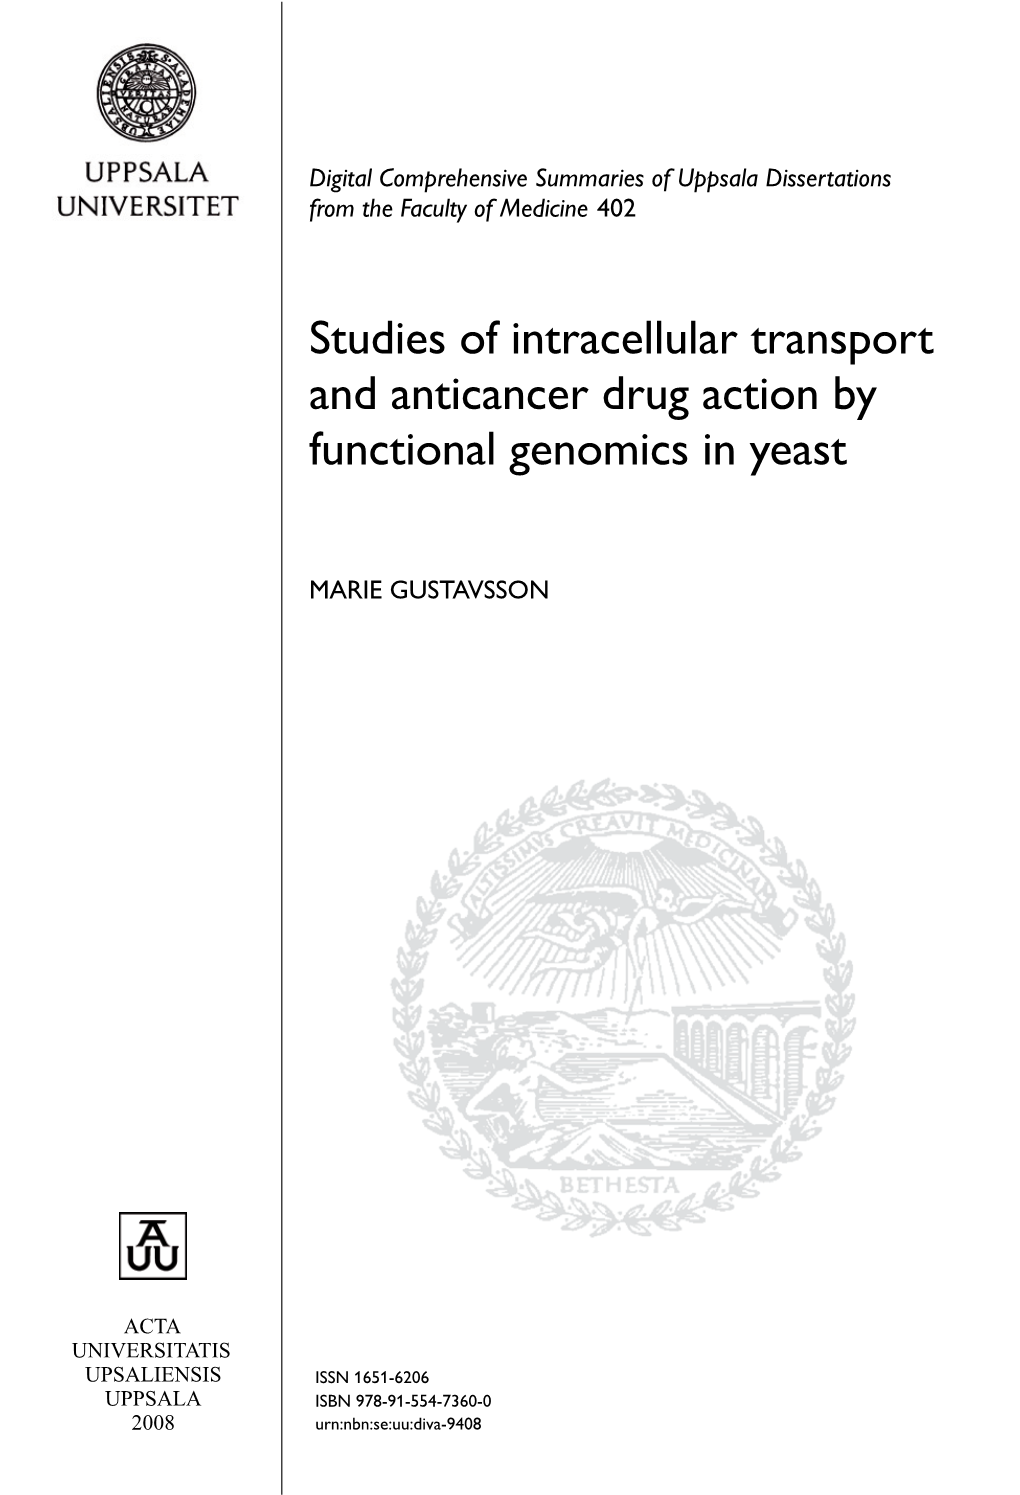 Studies of Intracellular Transport and Anticancer Drug Action by Functional Genomics in Yeast